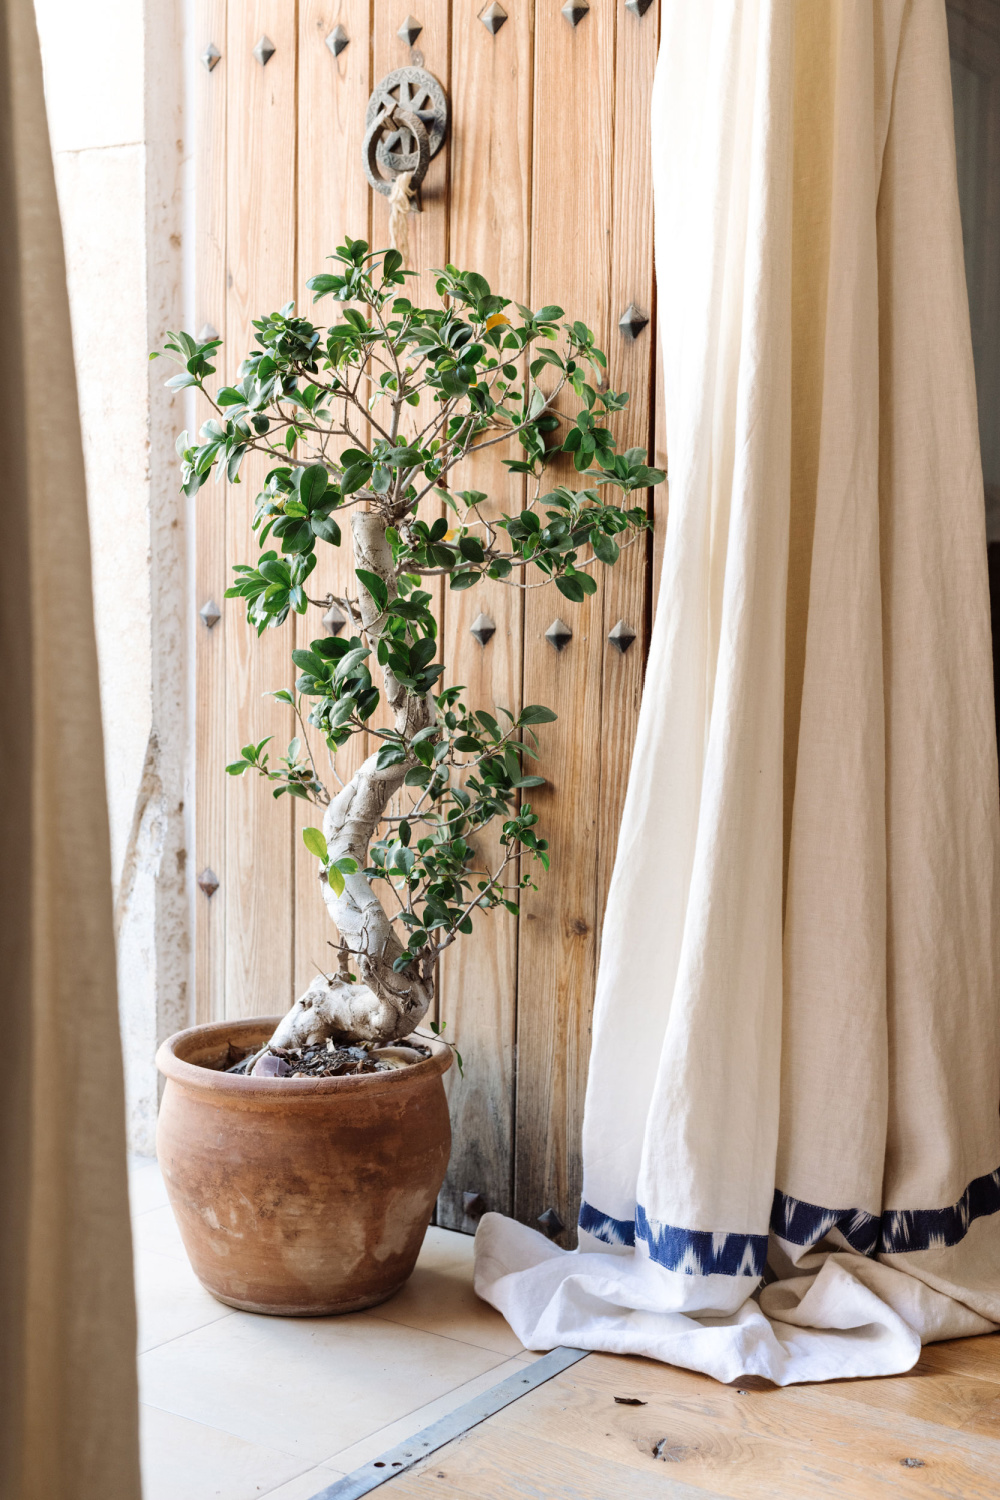 Potted tree in basket, linen curtain and rustic wood door - Fantastic Frank.